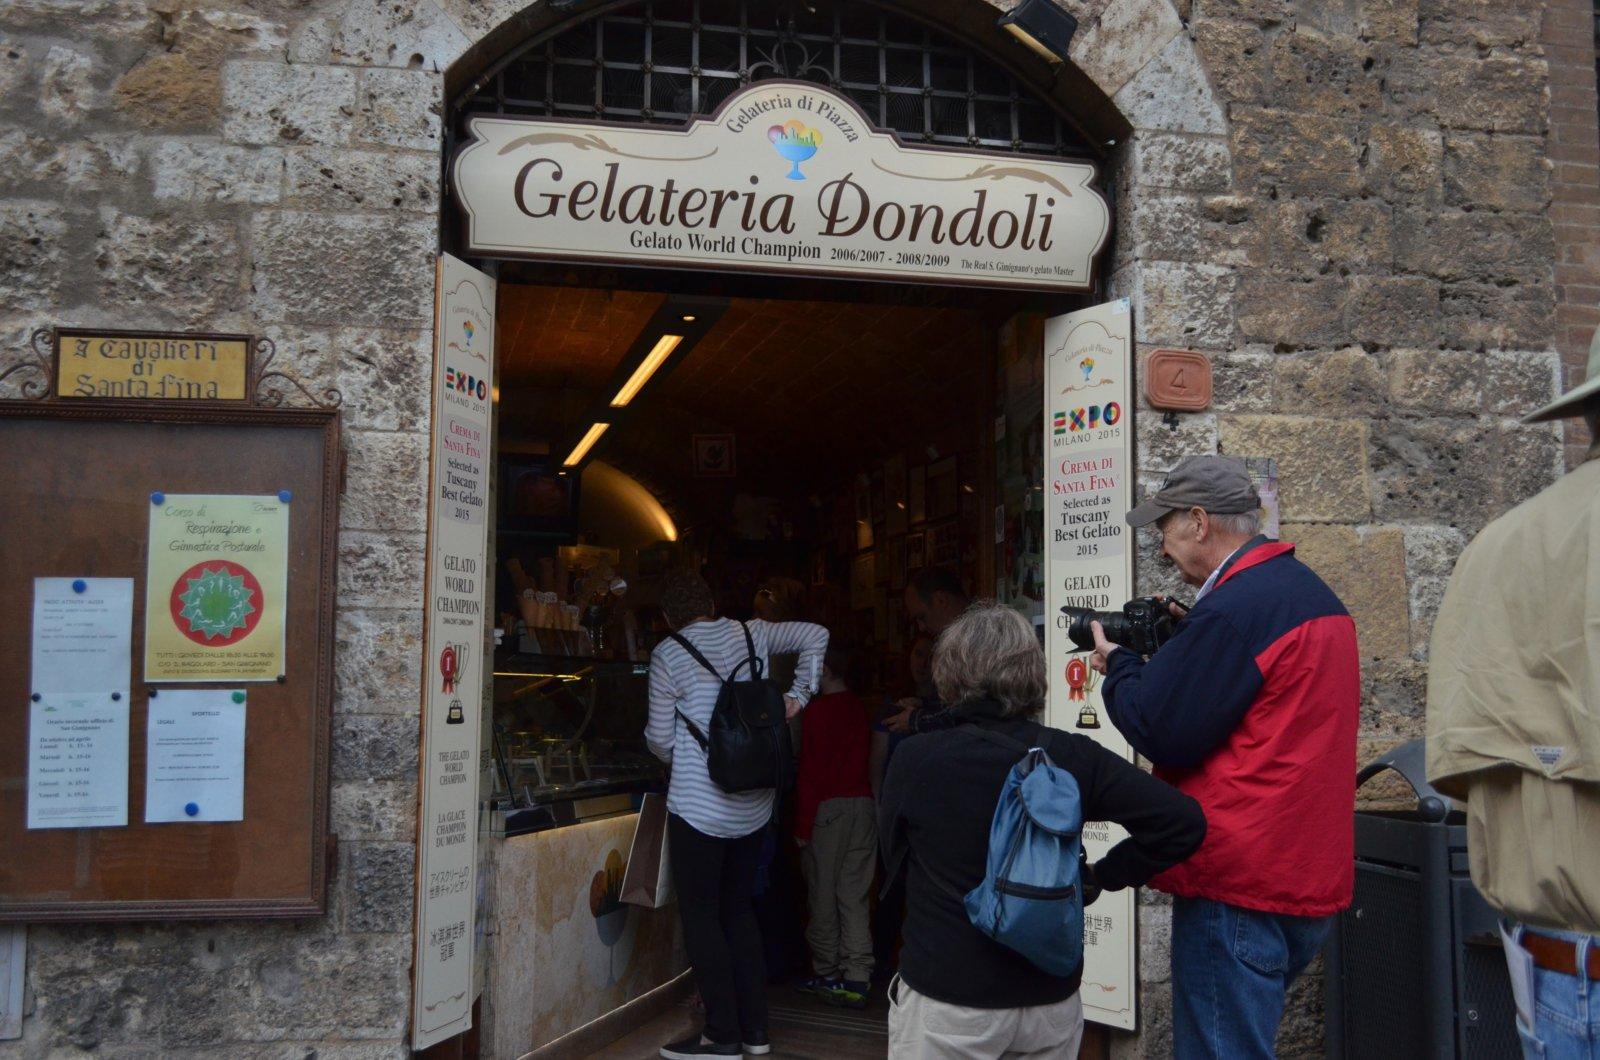 We started with gelato at the World Champion Gelateria.